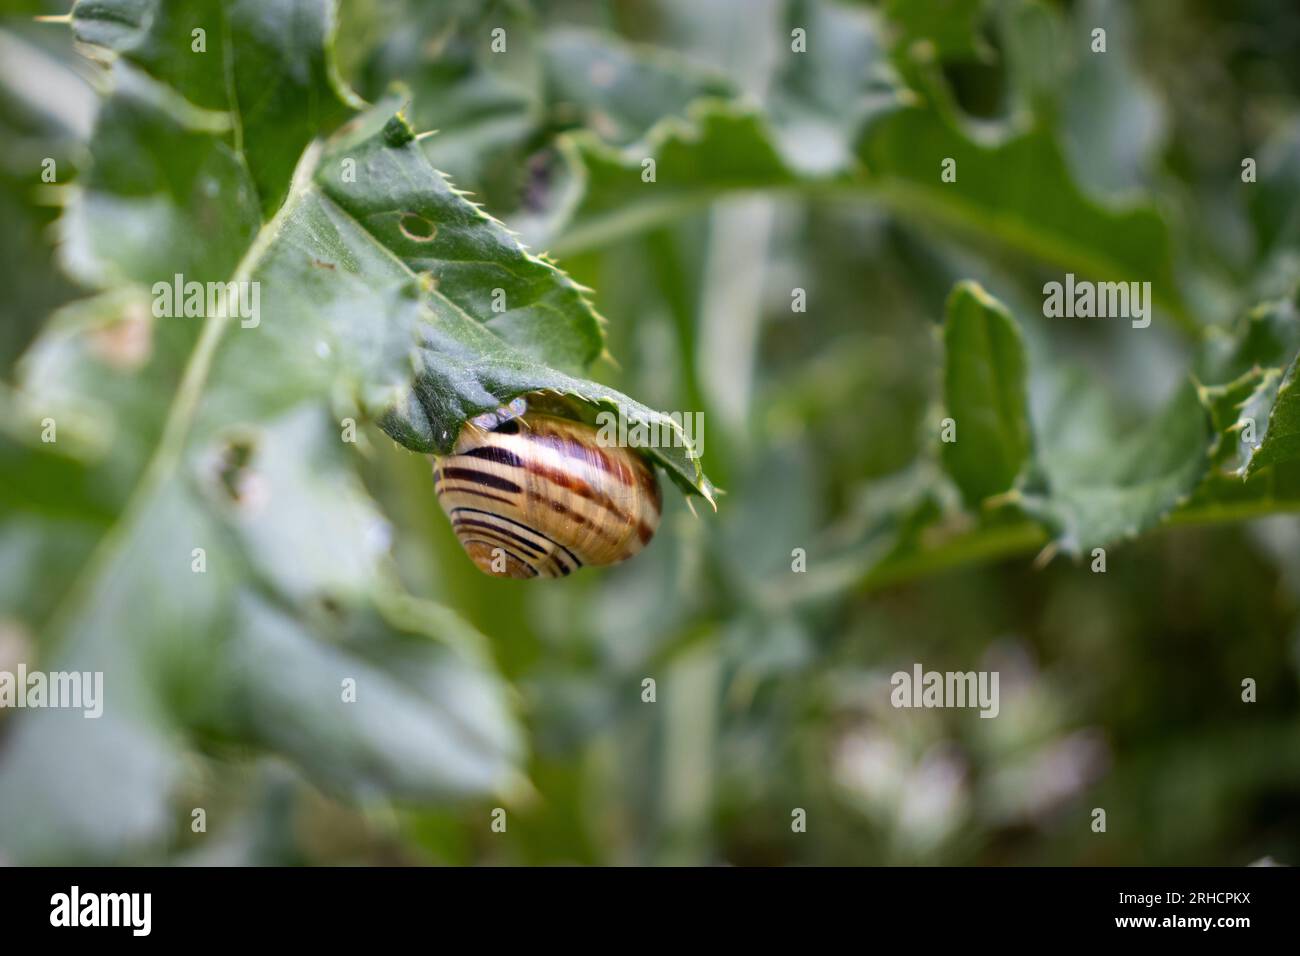 A striped-shell snail on a jagged-edge leaf - shallow depth of field - blurred green background Stock Photo